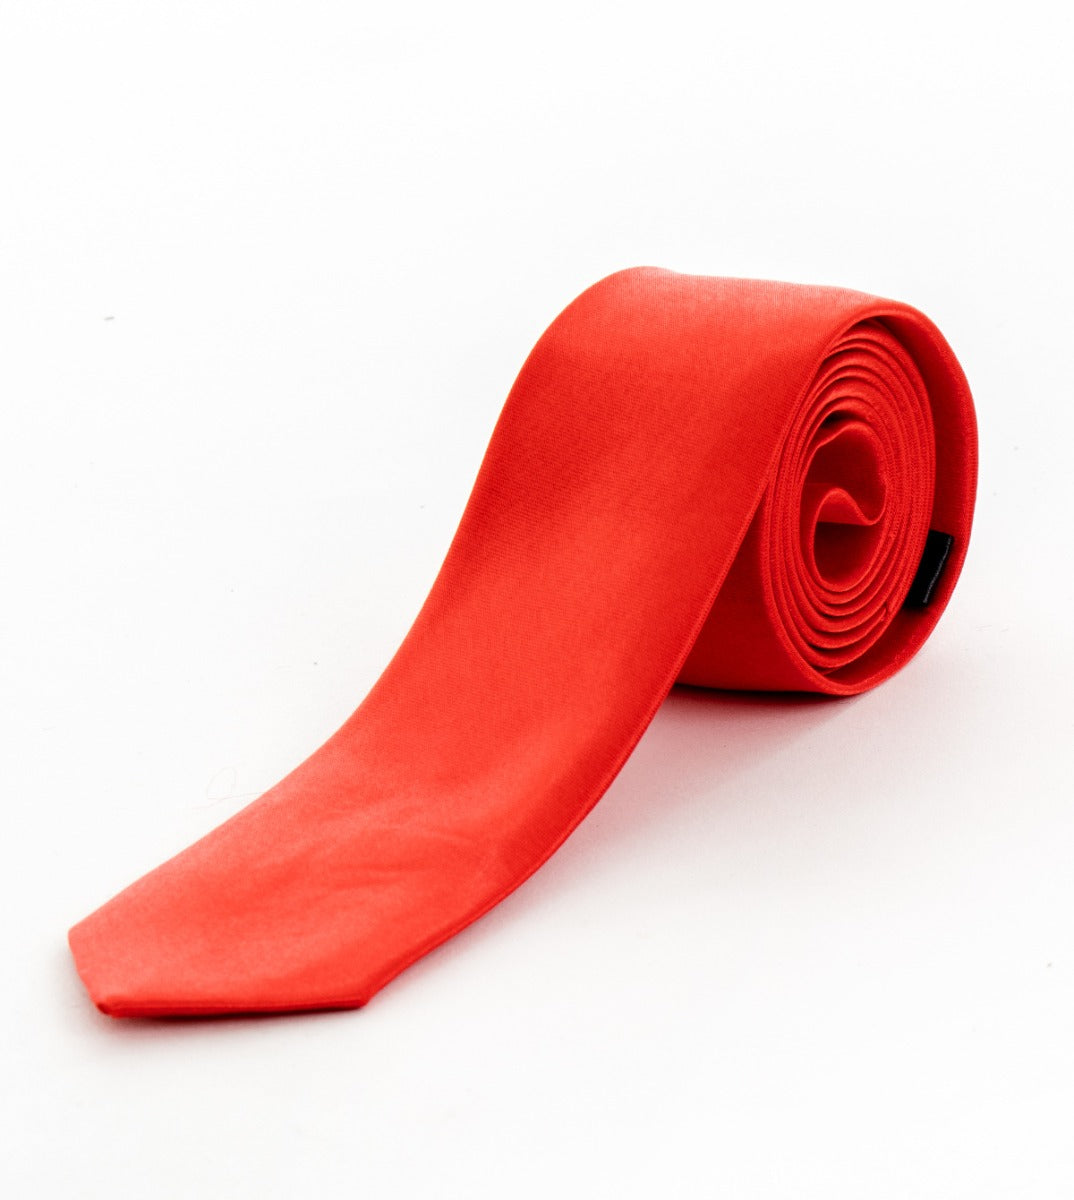 Unisex Men's Tie Thin Tie Elegant Ceremony Casual Basic Red Satin GIOSAL-CP1047A